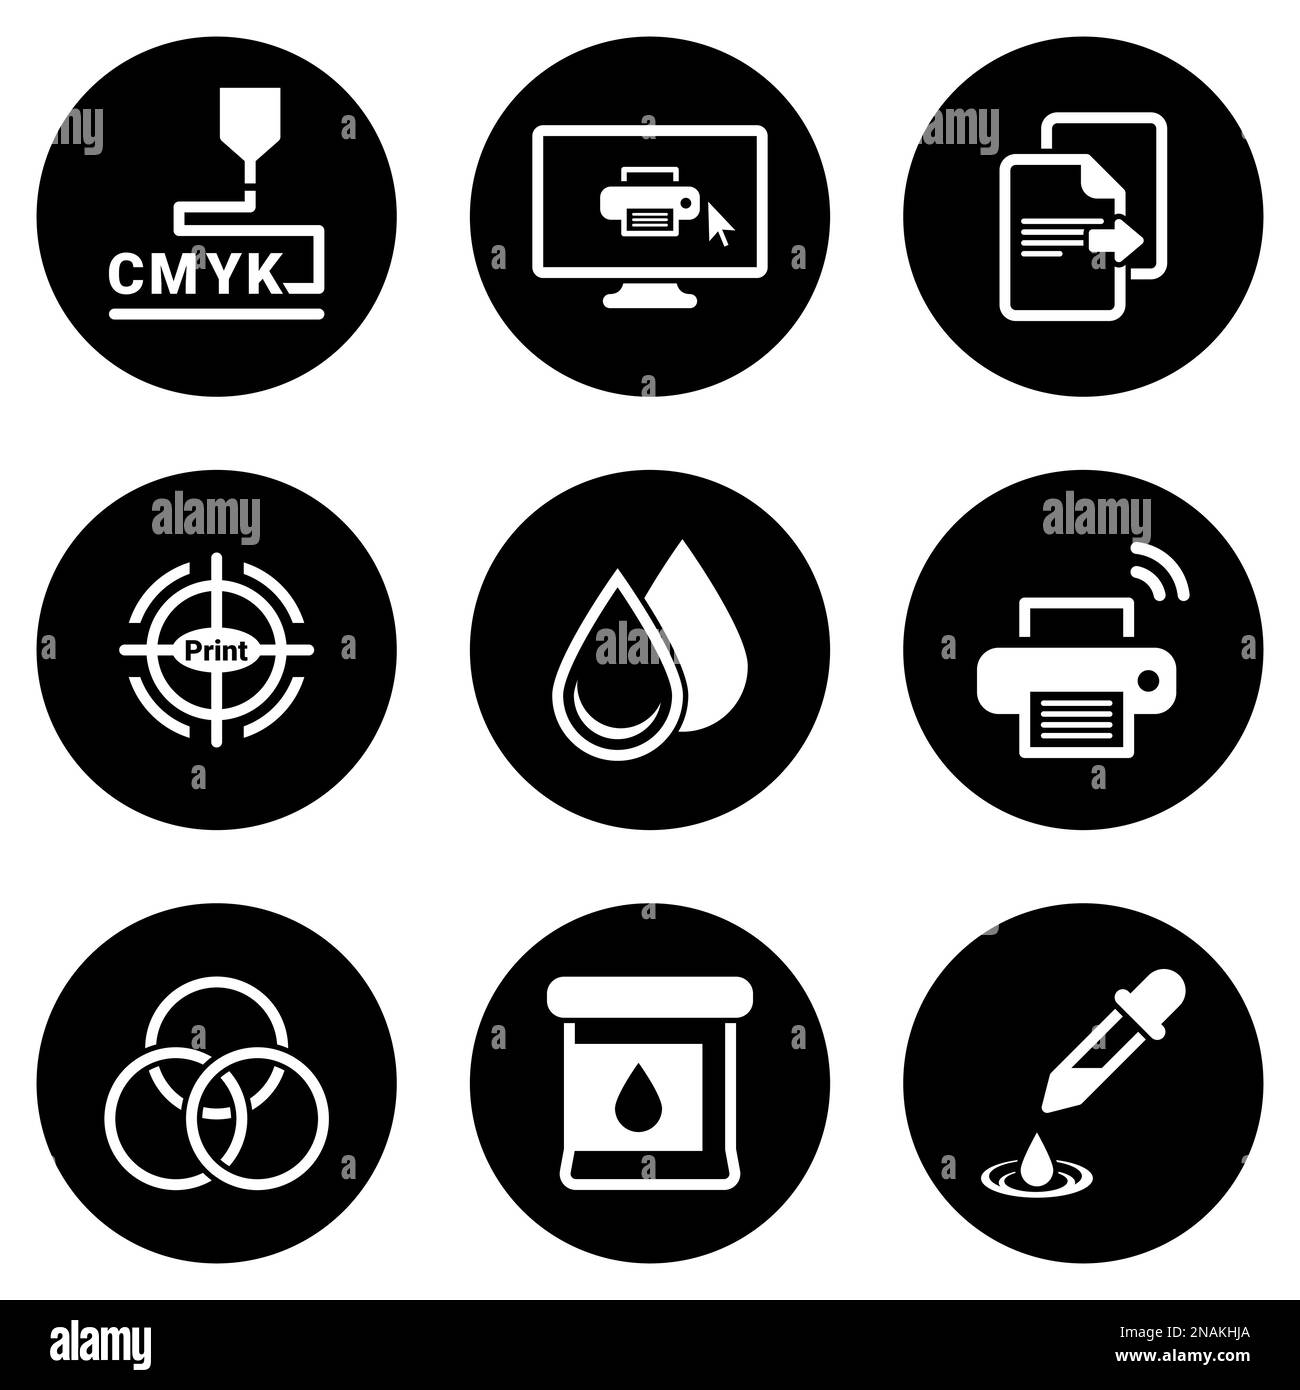 Set of simple icons on a theme printing, vector, design, collection, flat, sign, symbol,element, object, illustration, isolated. White background Stock Vector